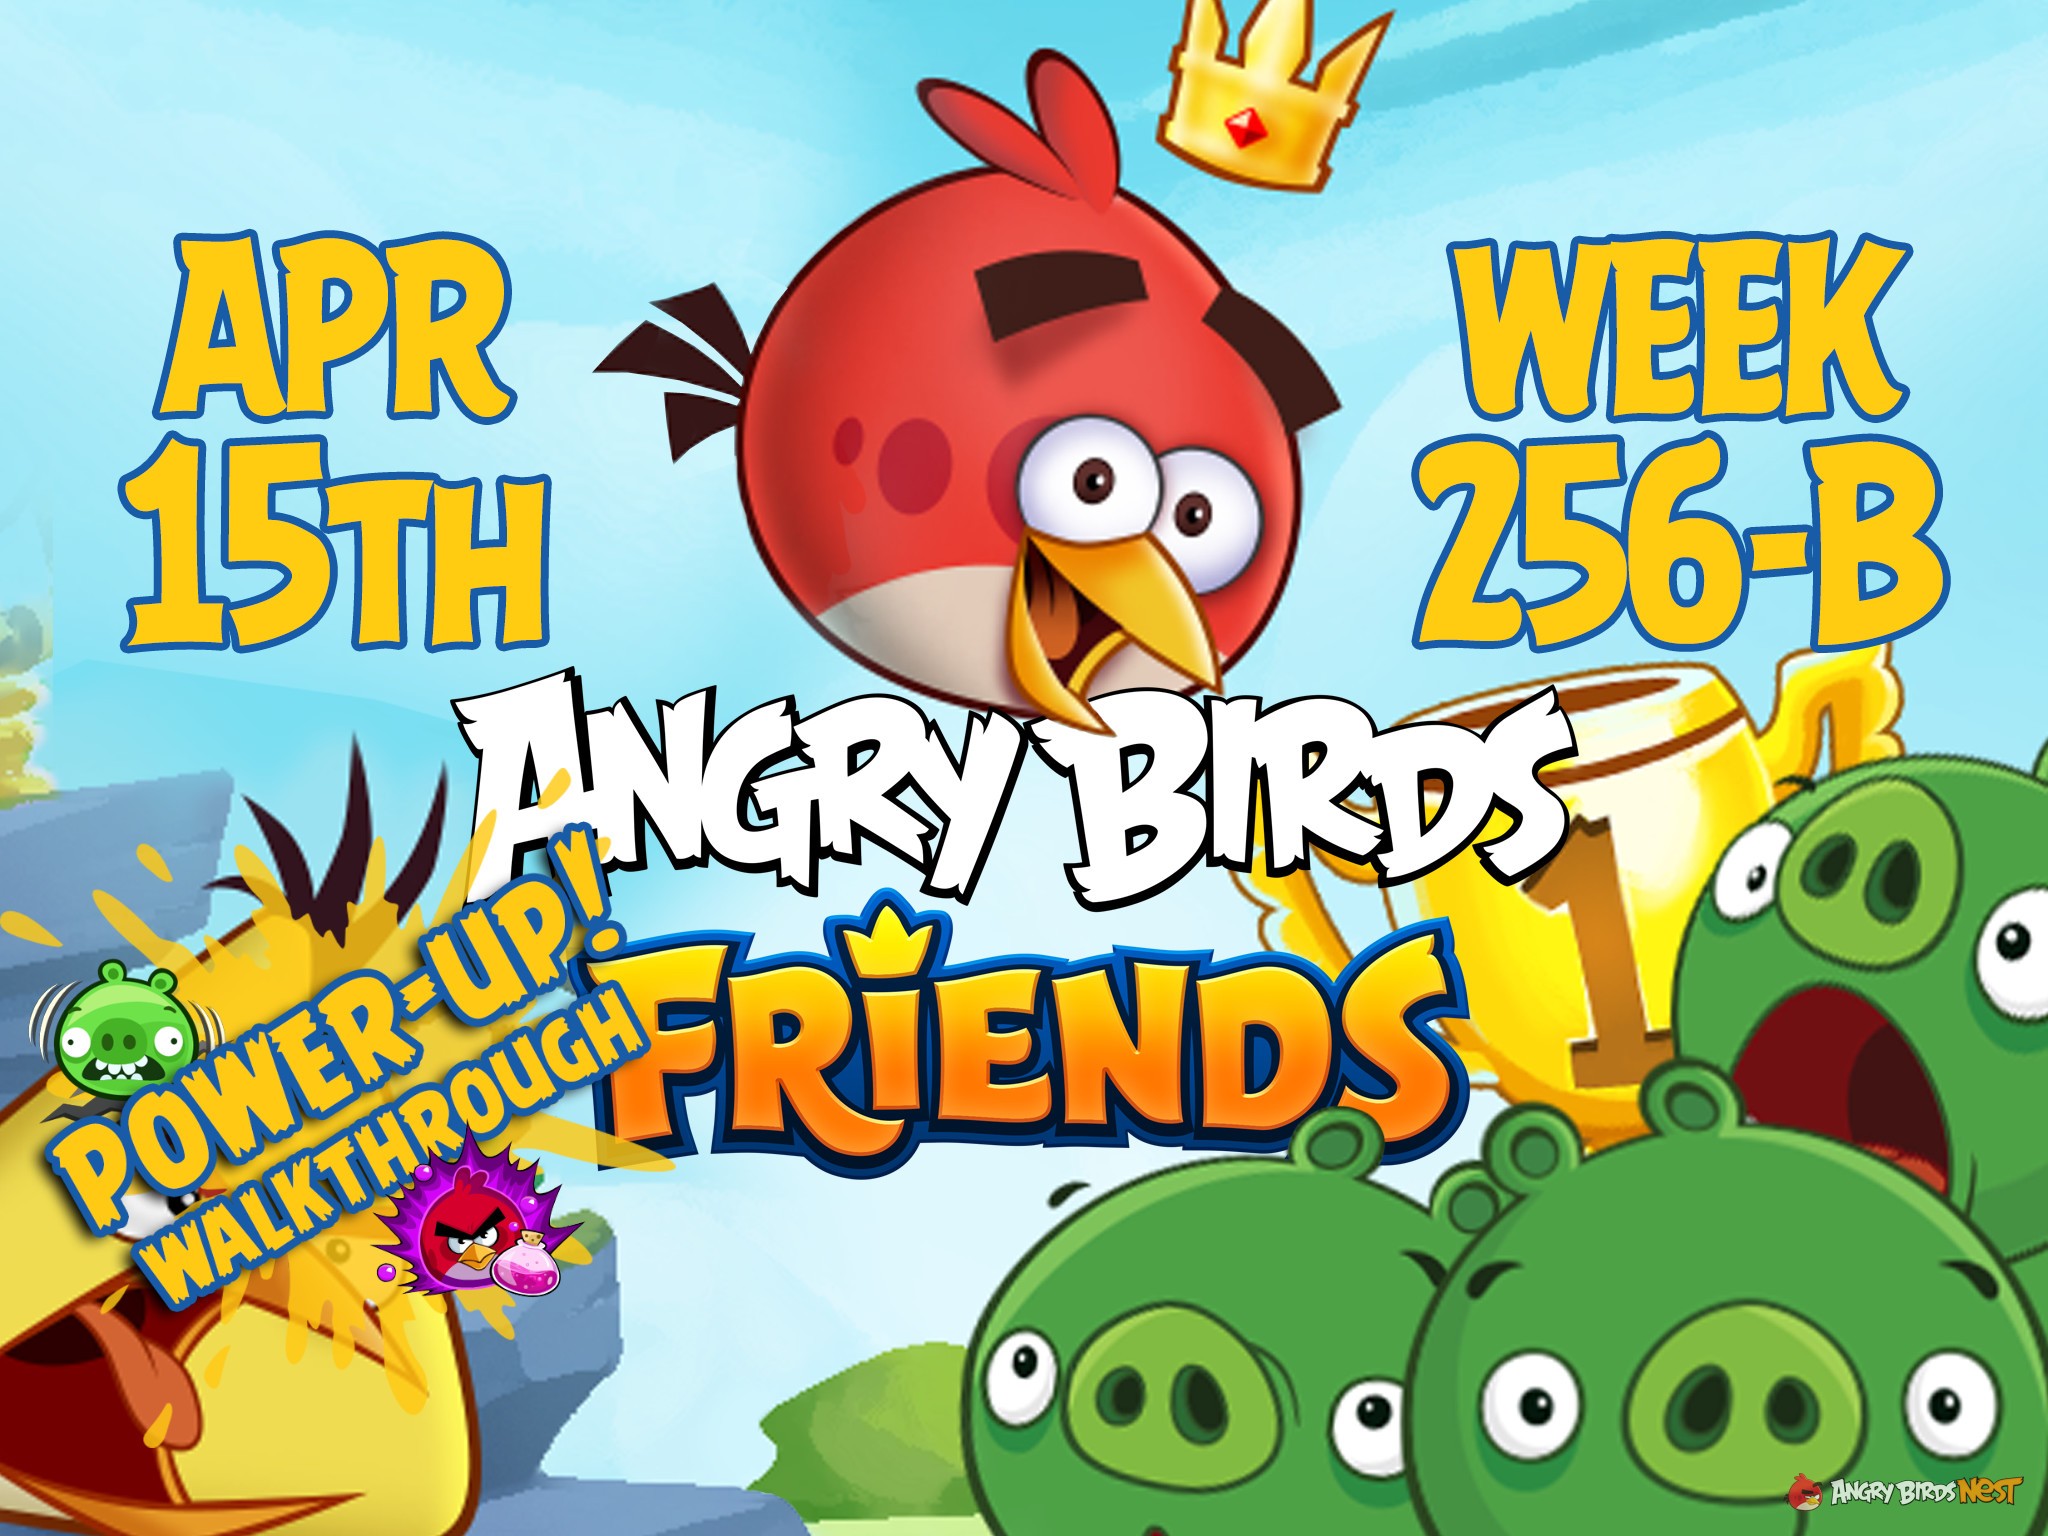 Angry Birds Friends Tournament Week 256-B Feature Image PU